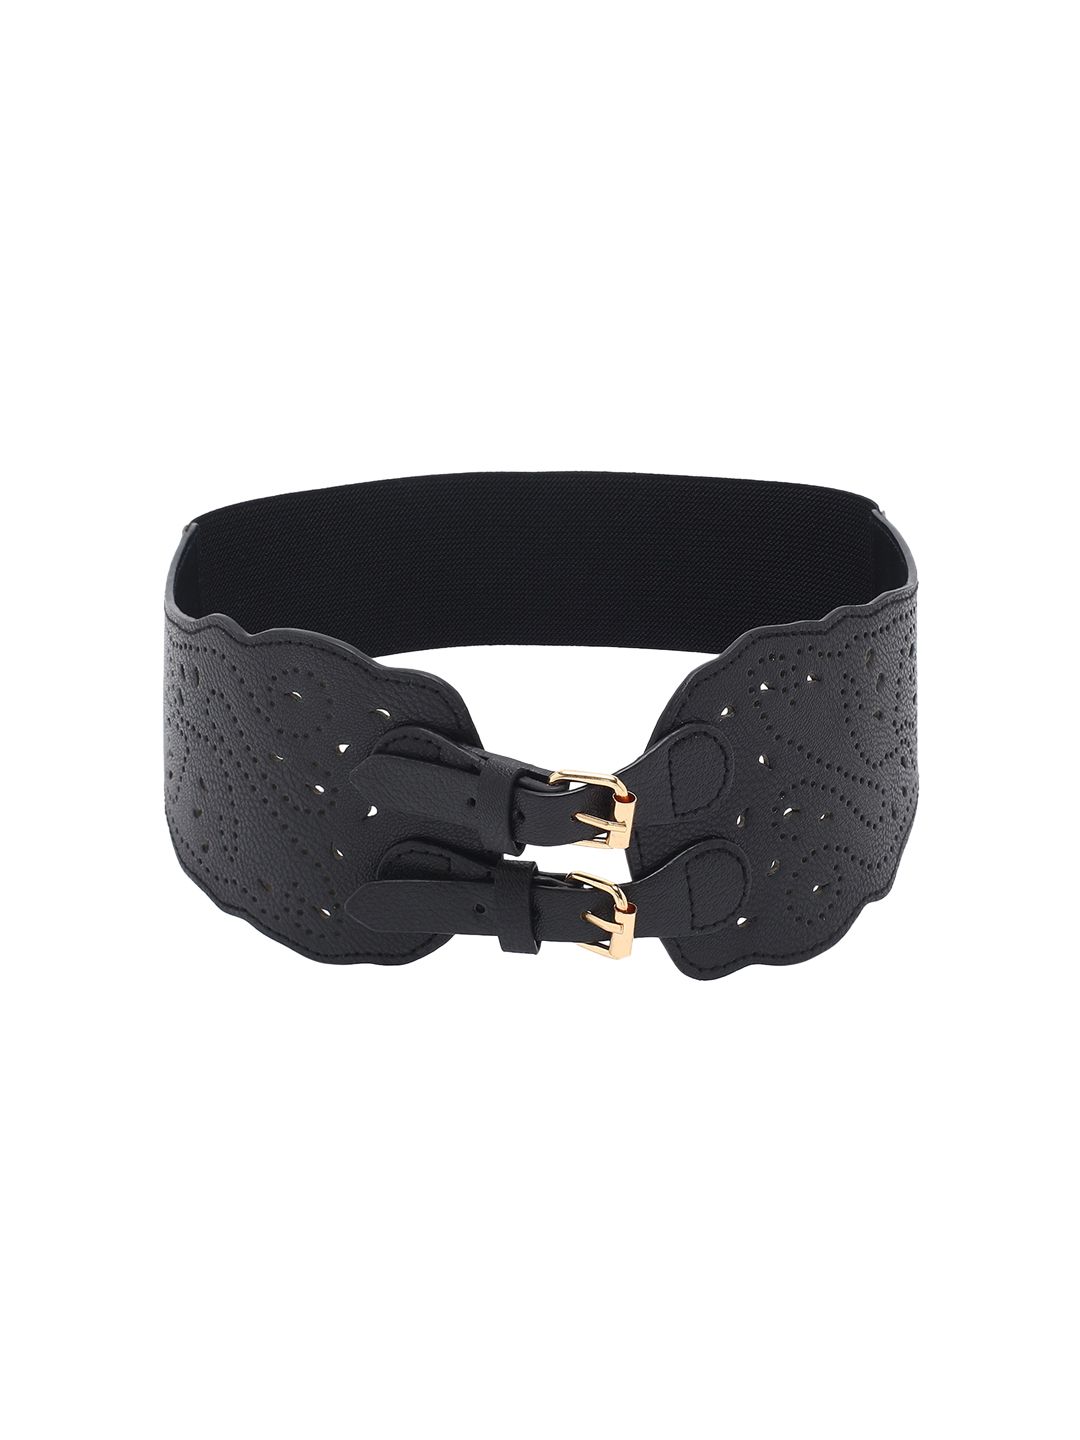 CRUSSET Women Black Stretchable Belt Price in India